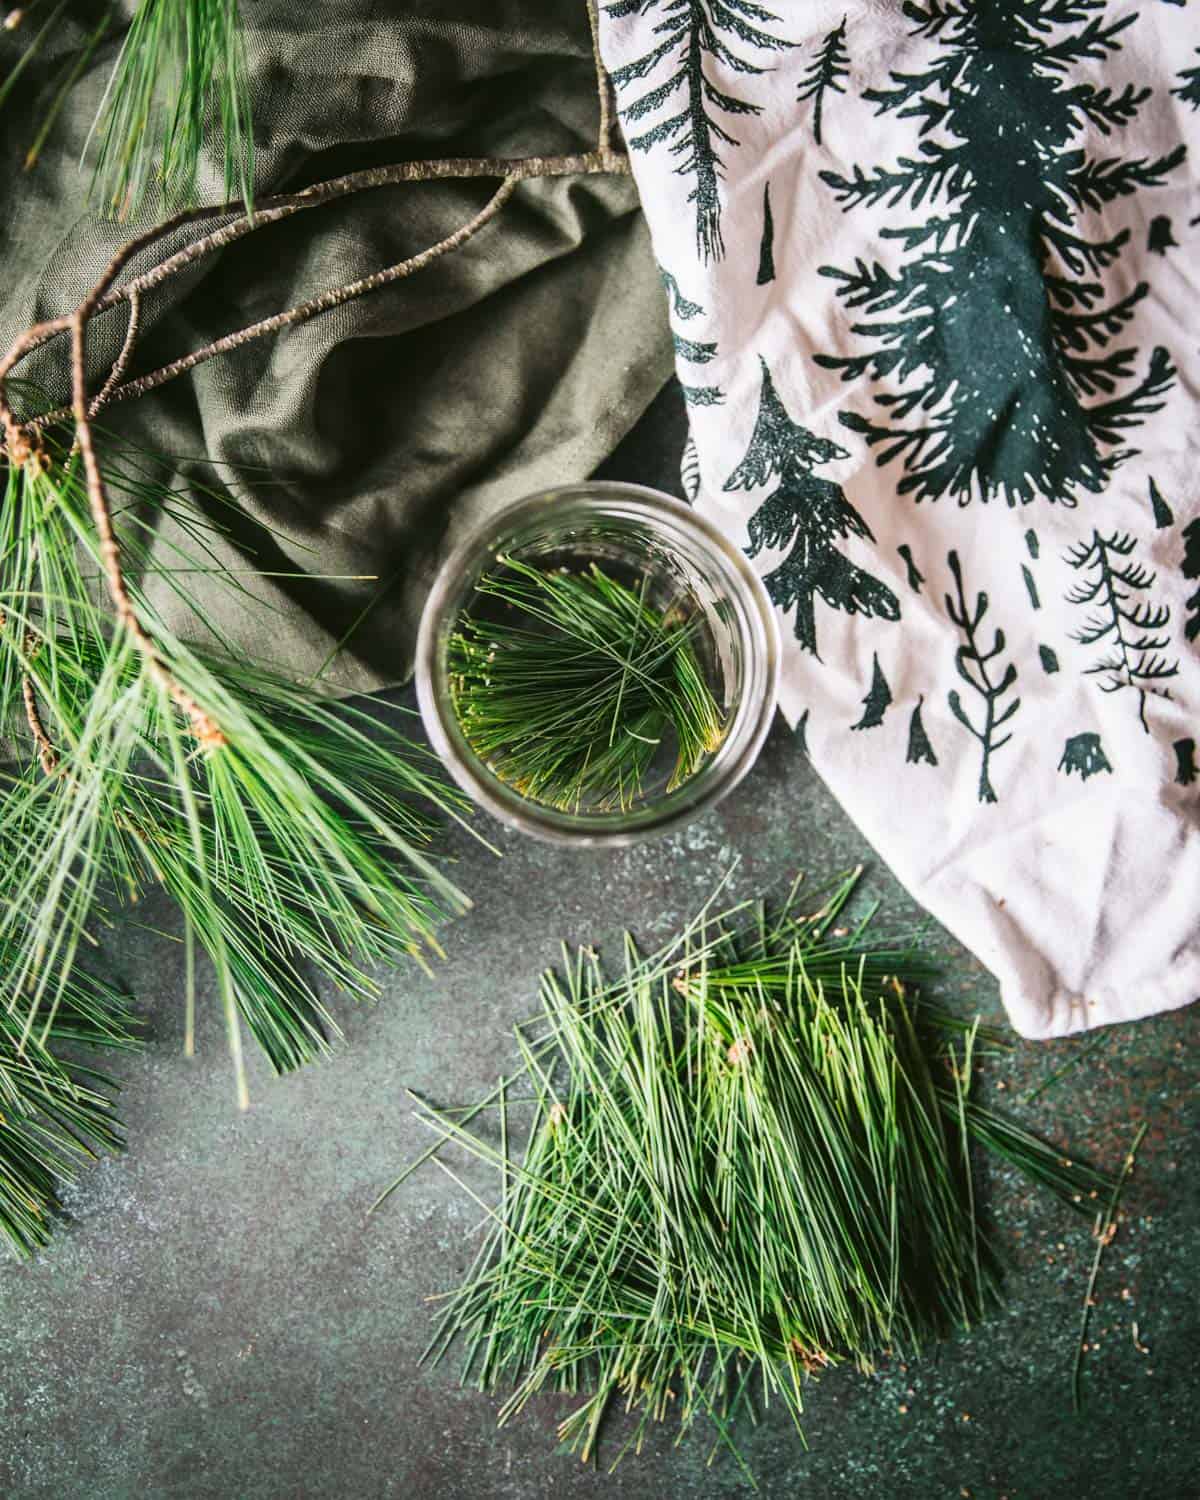 Top view of a jar filled with fresh pine needles, surrounded by pine branches and a towel with a green tree on it.